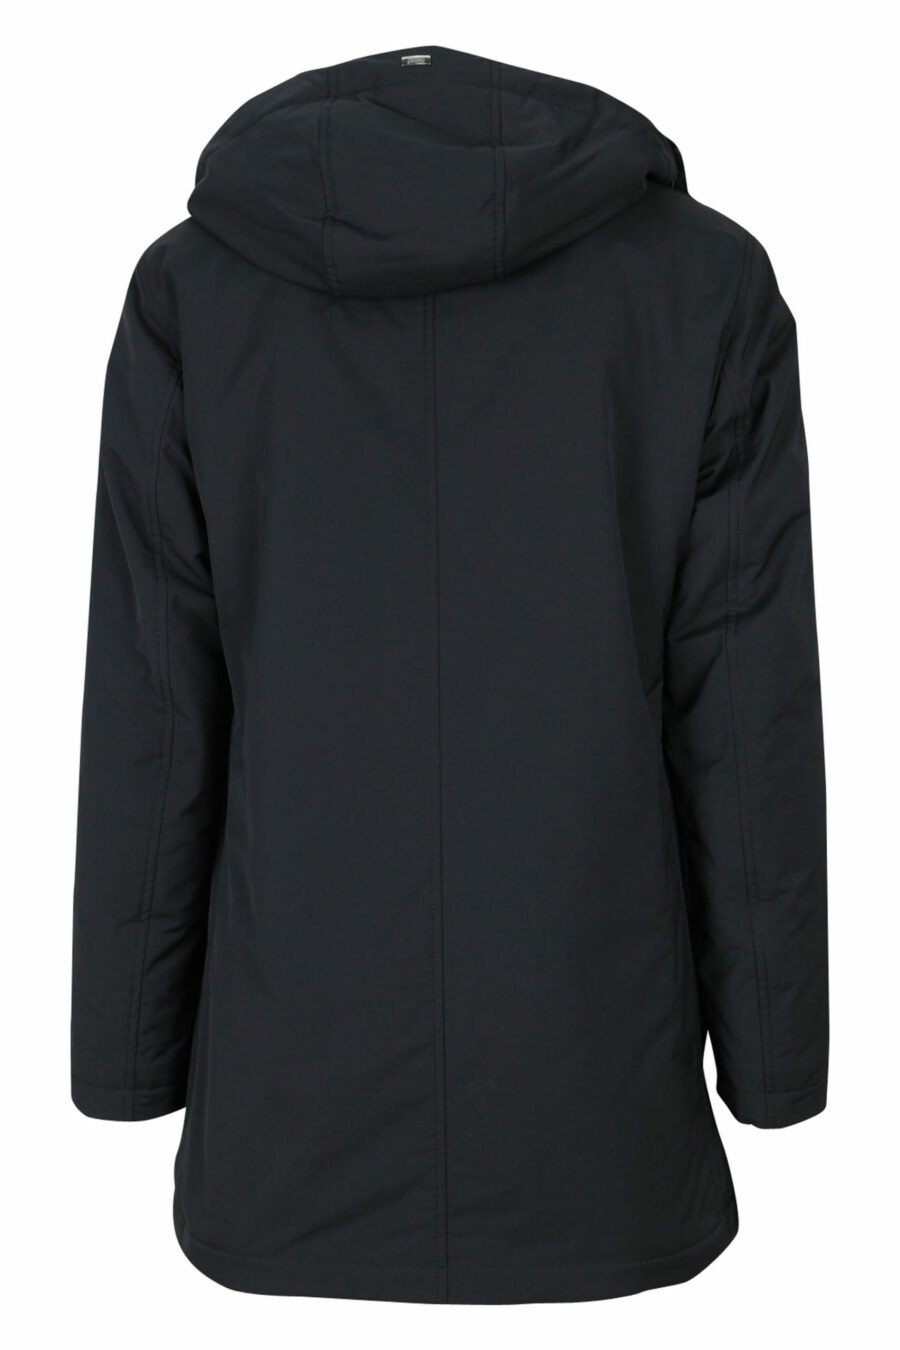 Black parka with hood and synthetic lining - 8055721650272 2 scaled